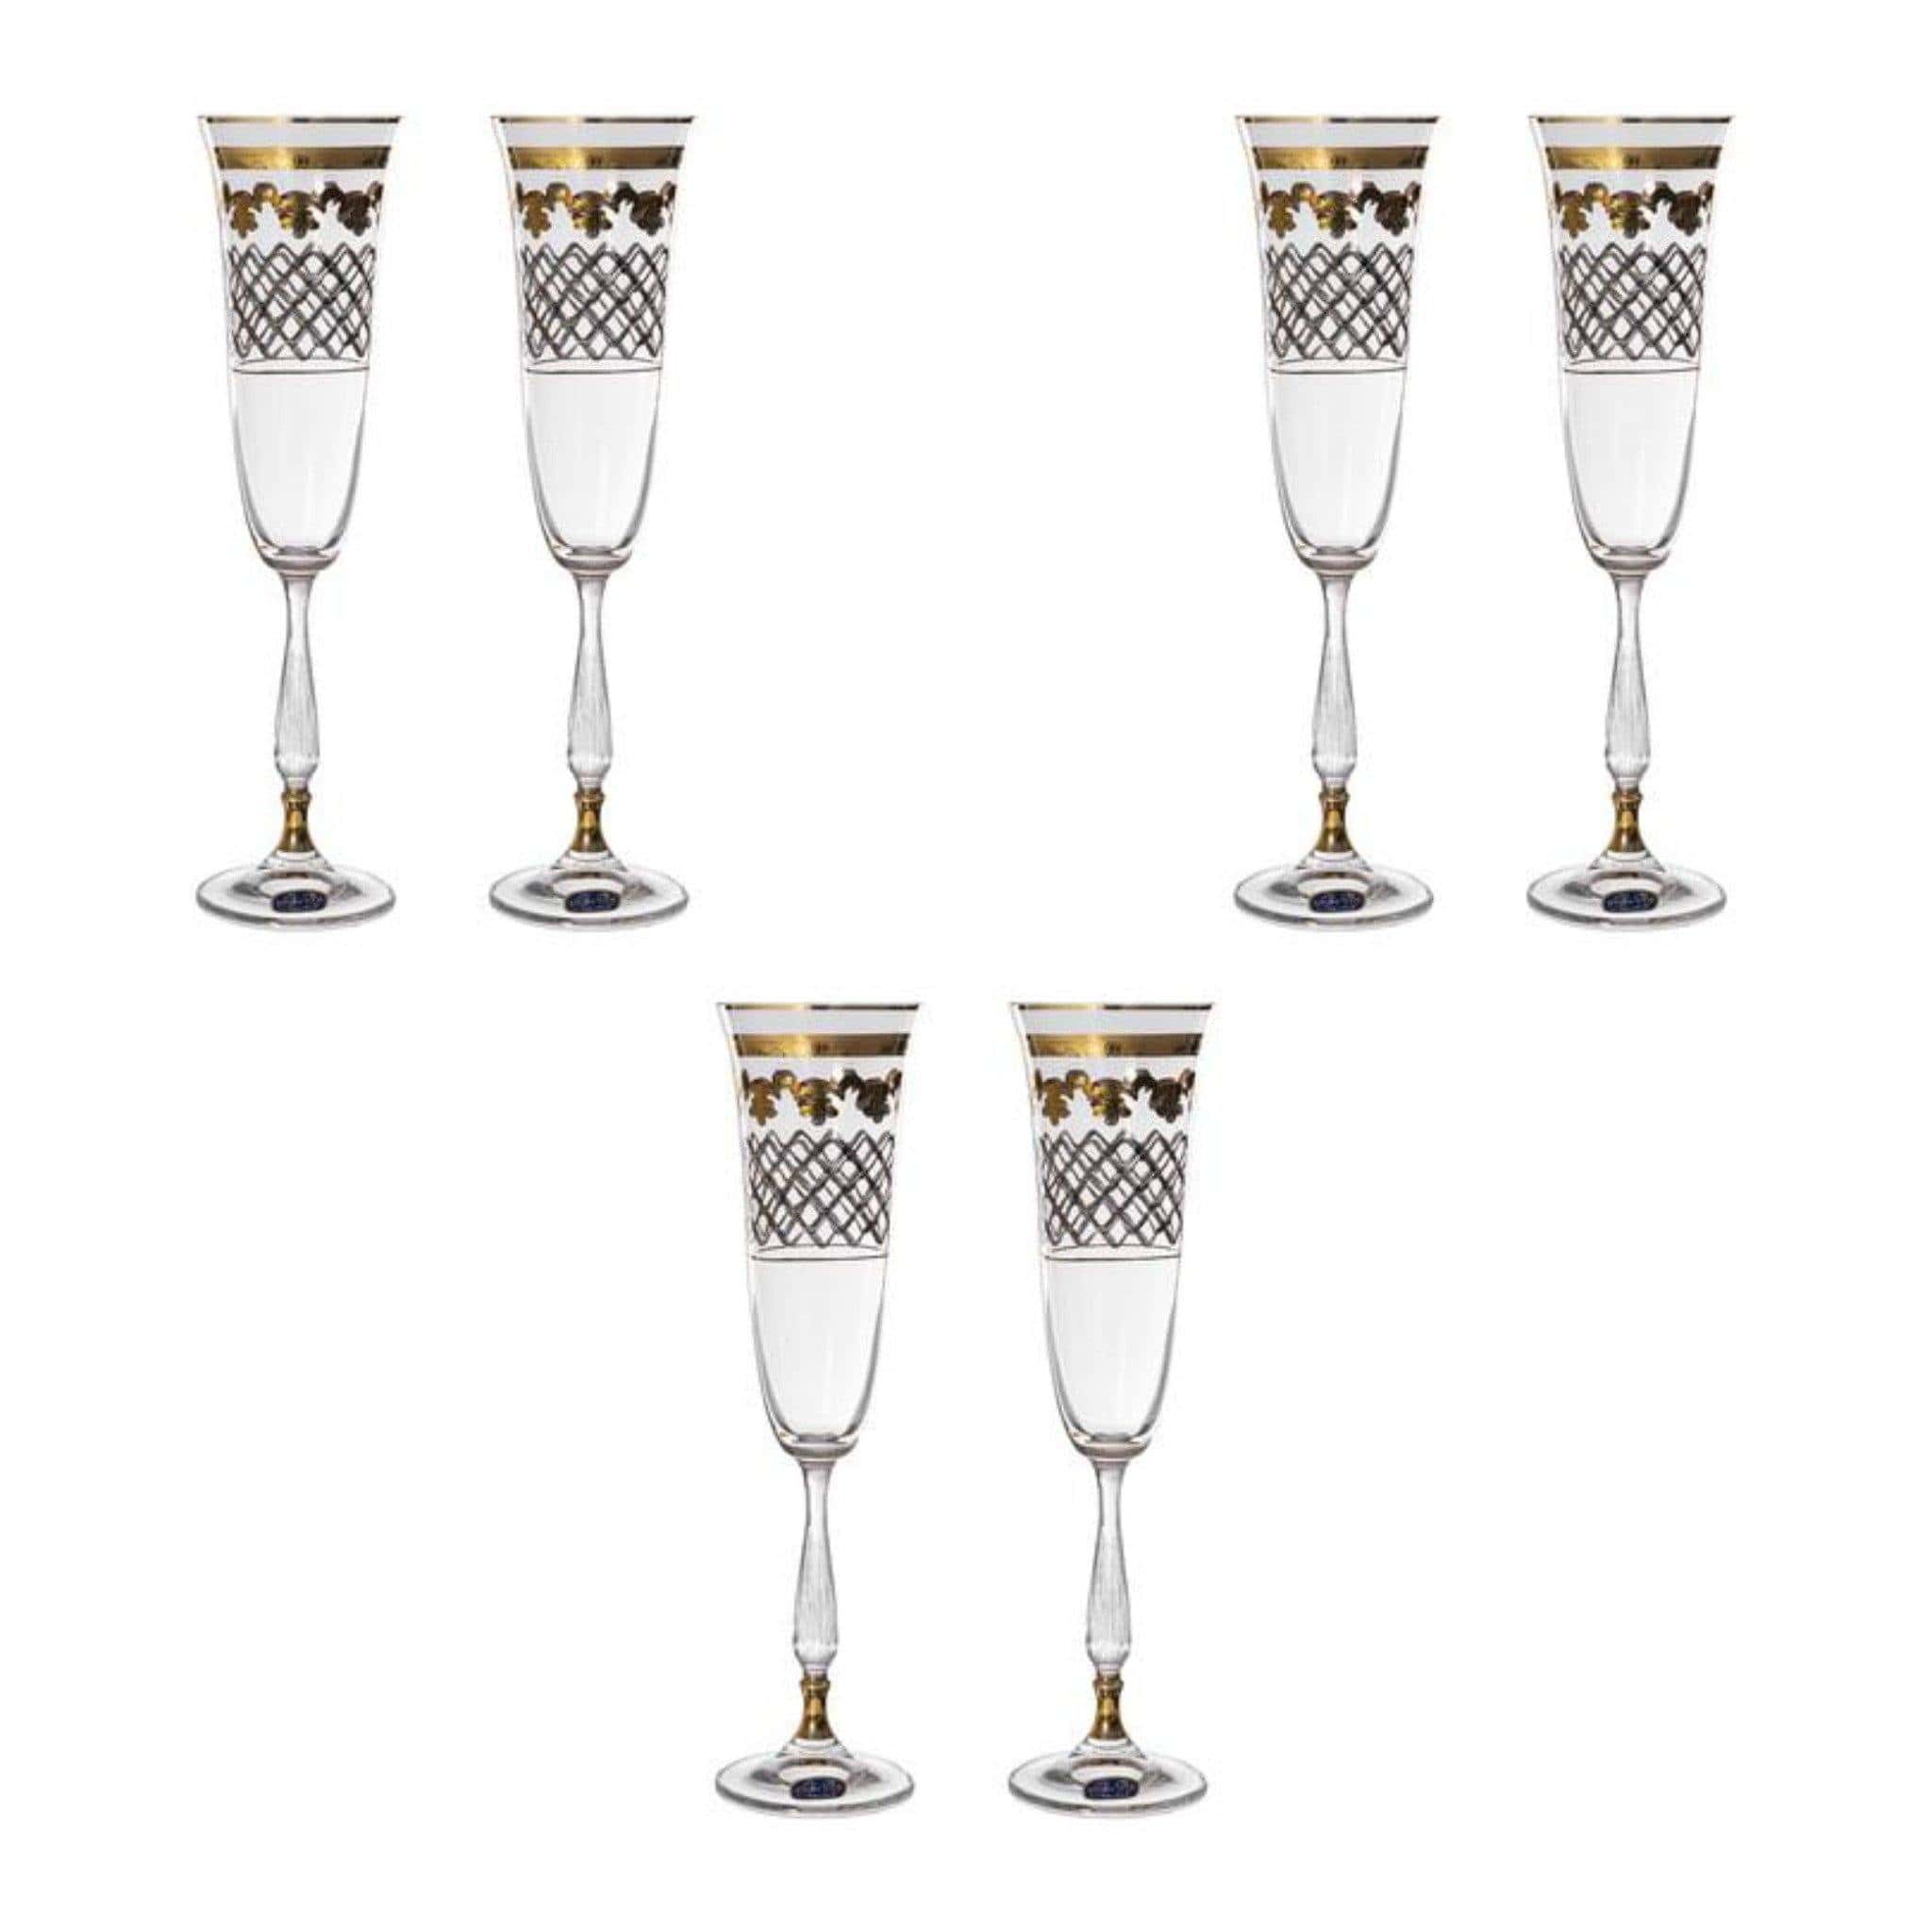 Bohemia Crystal - Flute Glass Set of 6 Pieces Silver & Gold - 150ml - 39000602